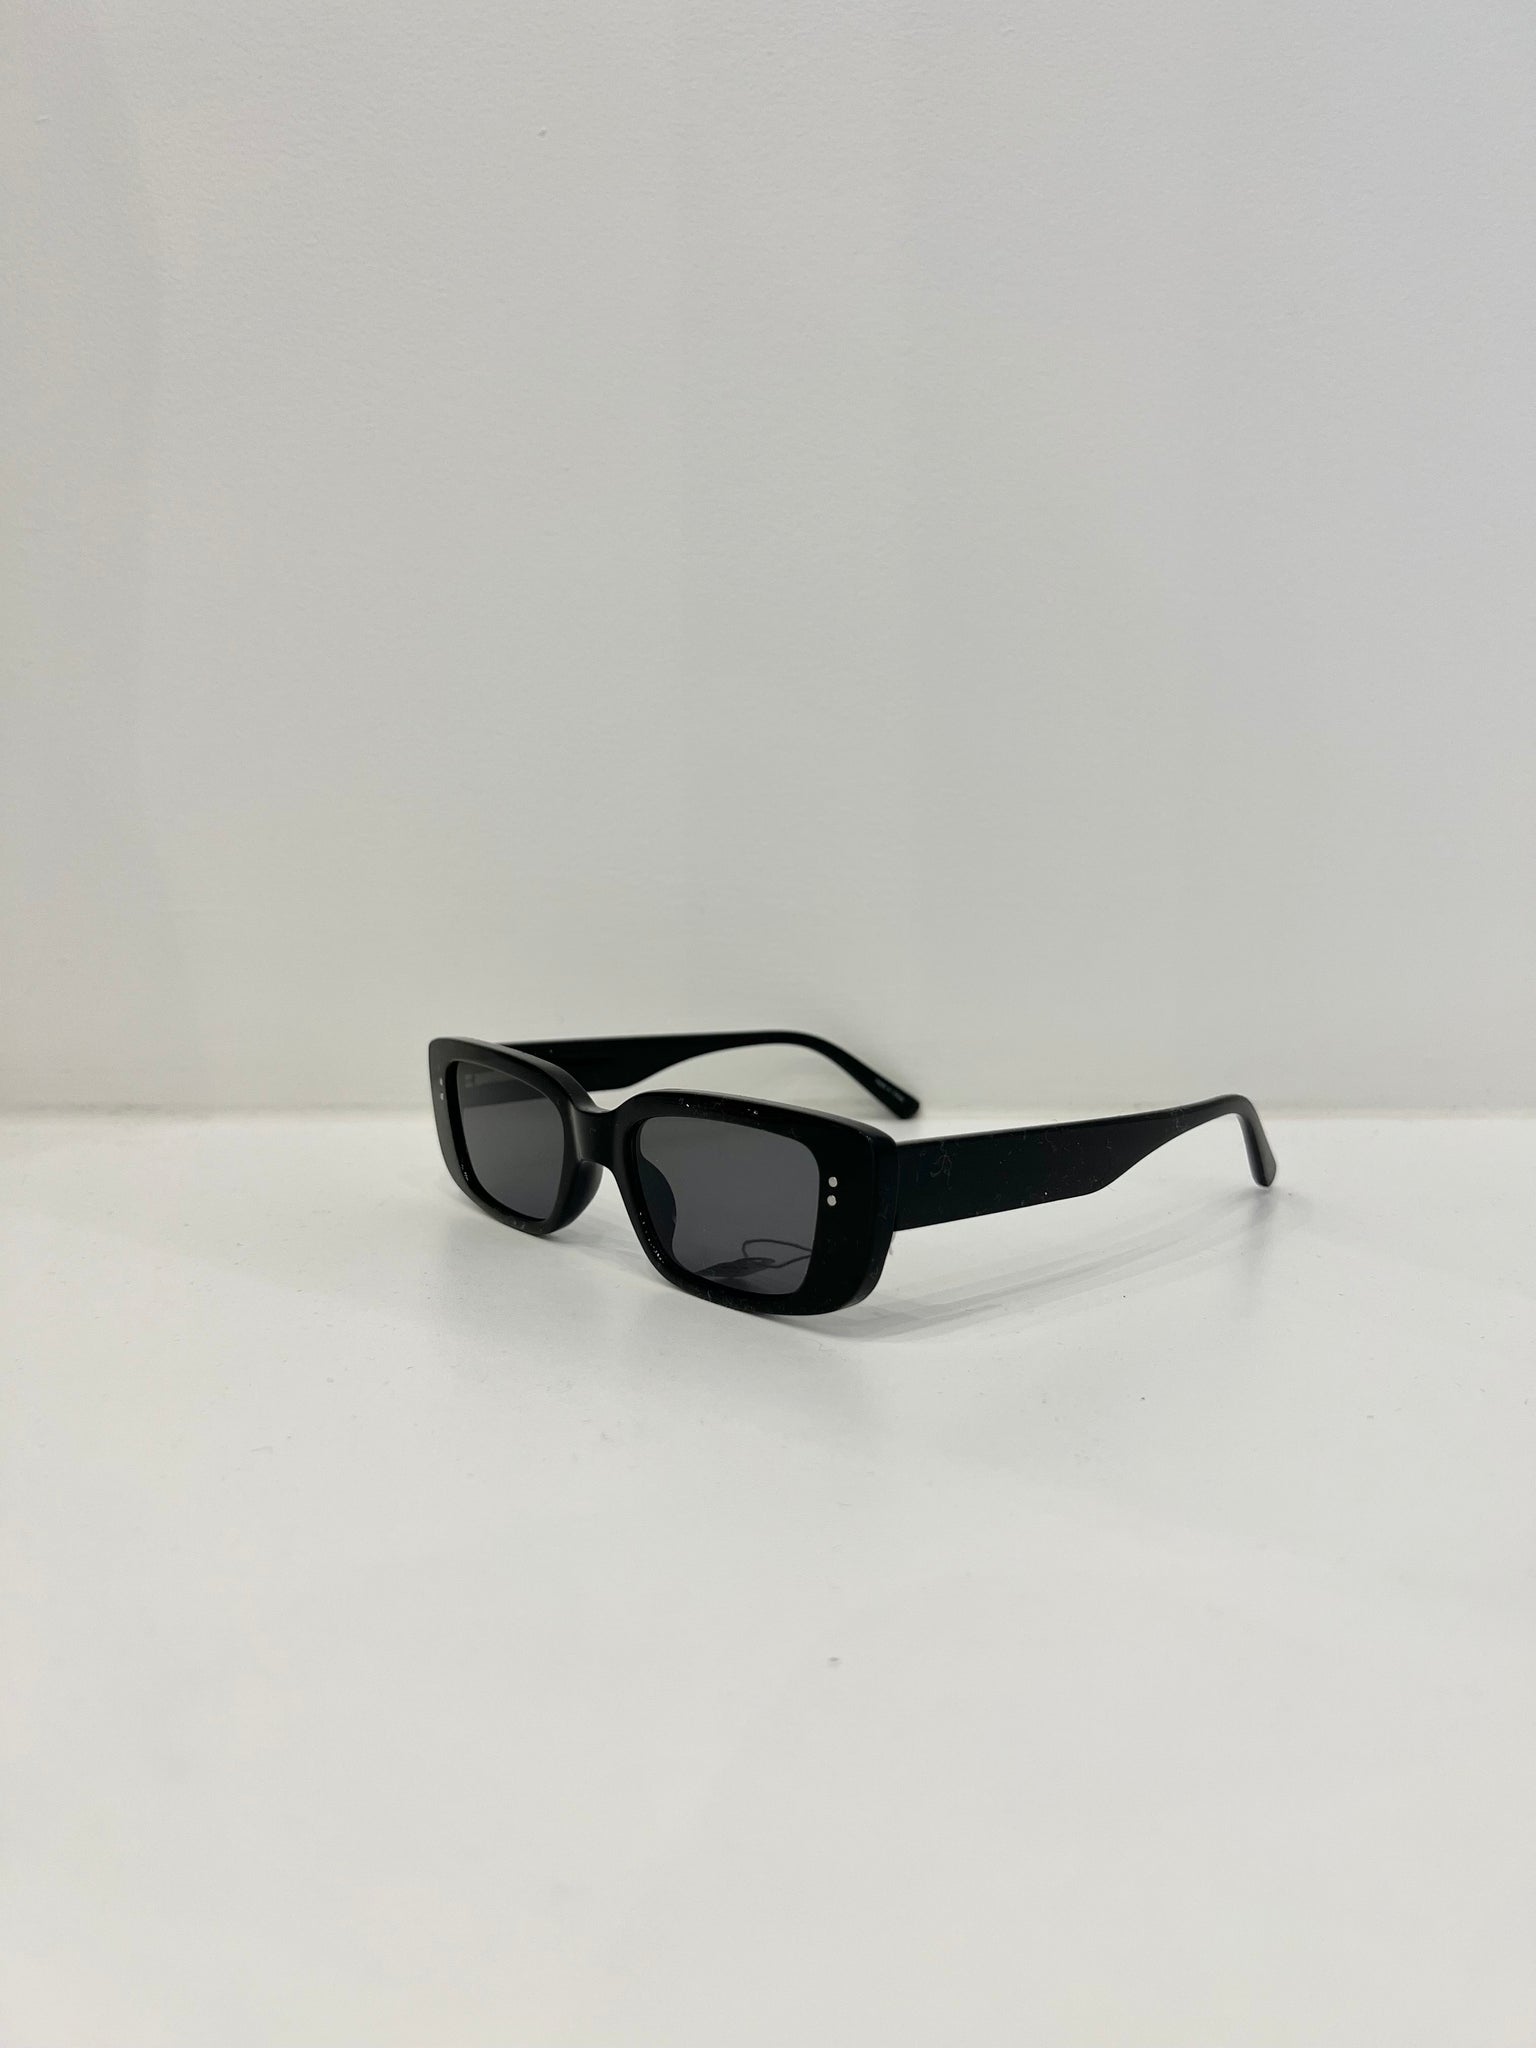 HOUSE Square sunnies